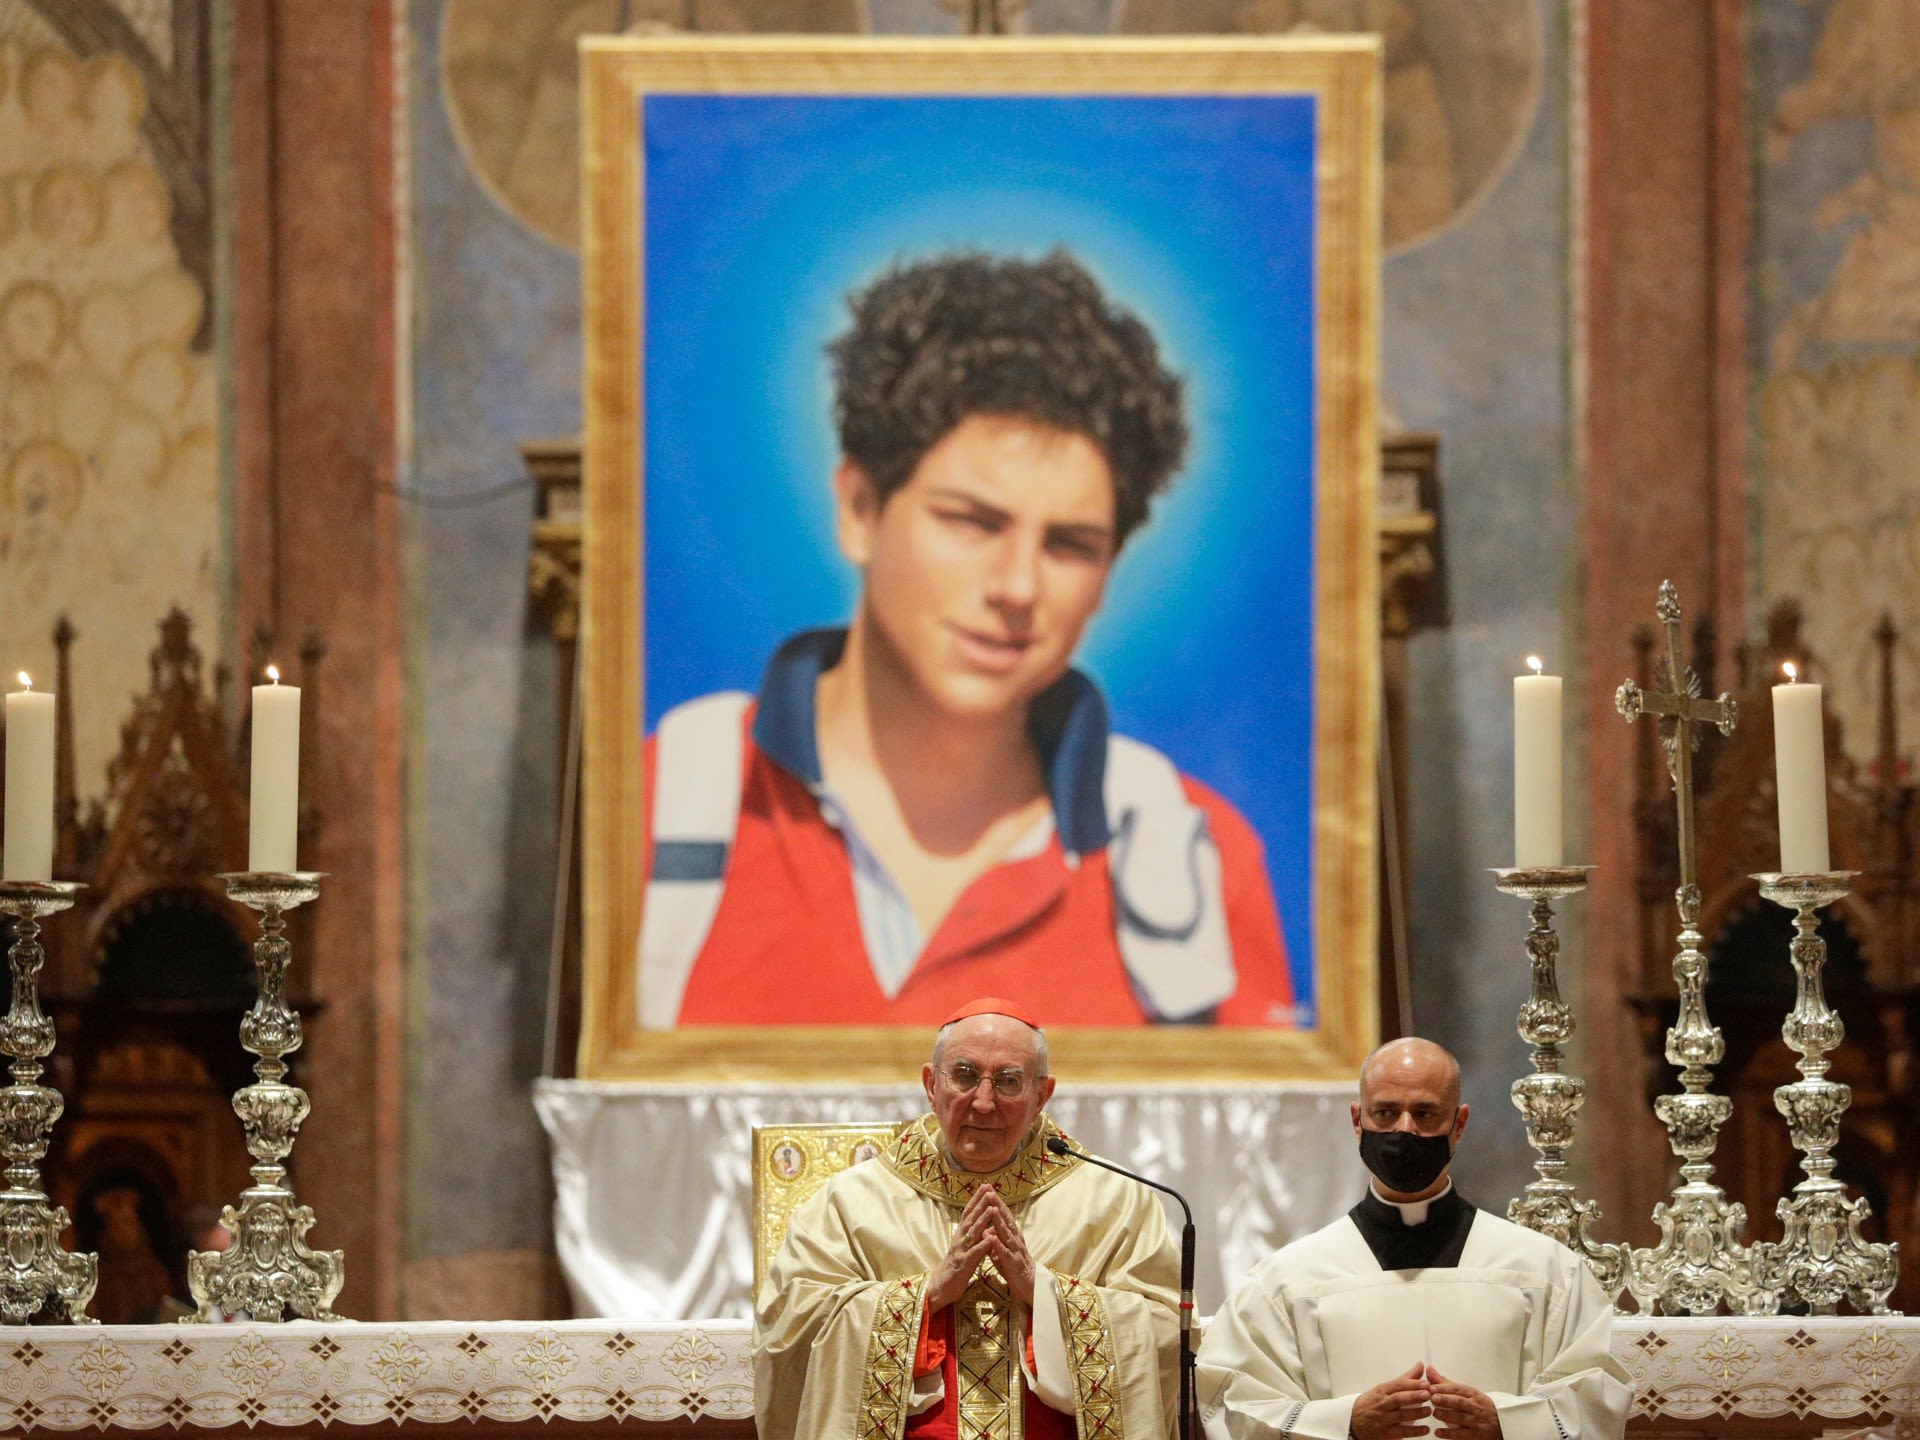 ‘God’s influencer’: Pope recognises Carlo Acutis as first millennial saint